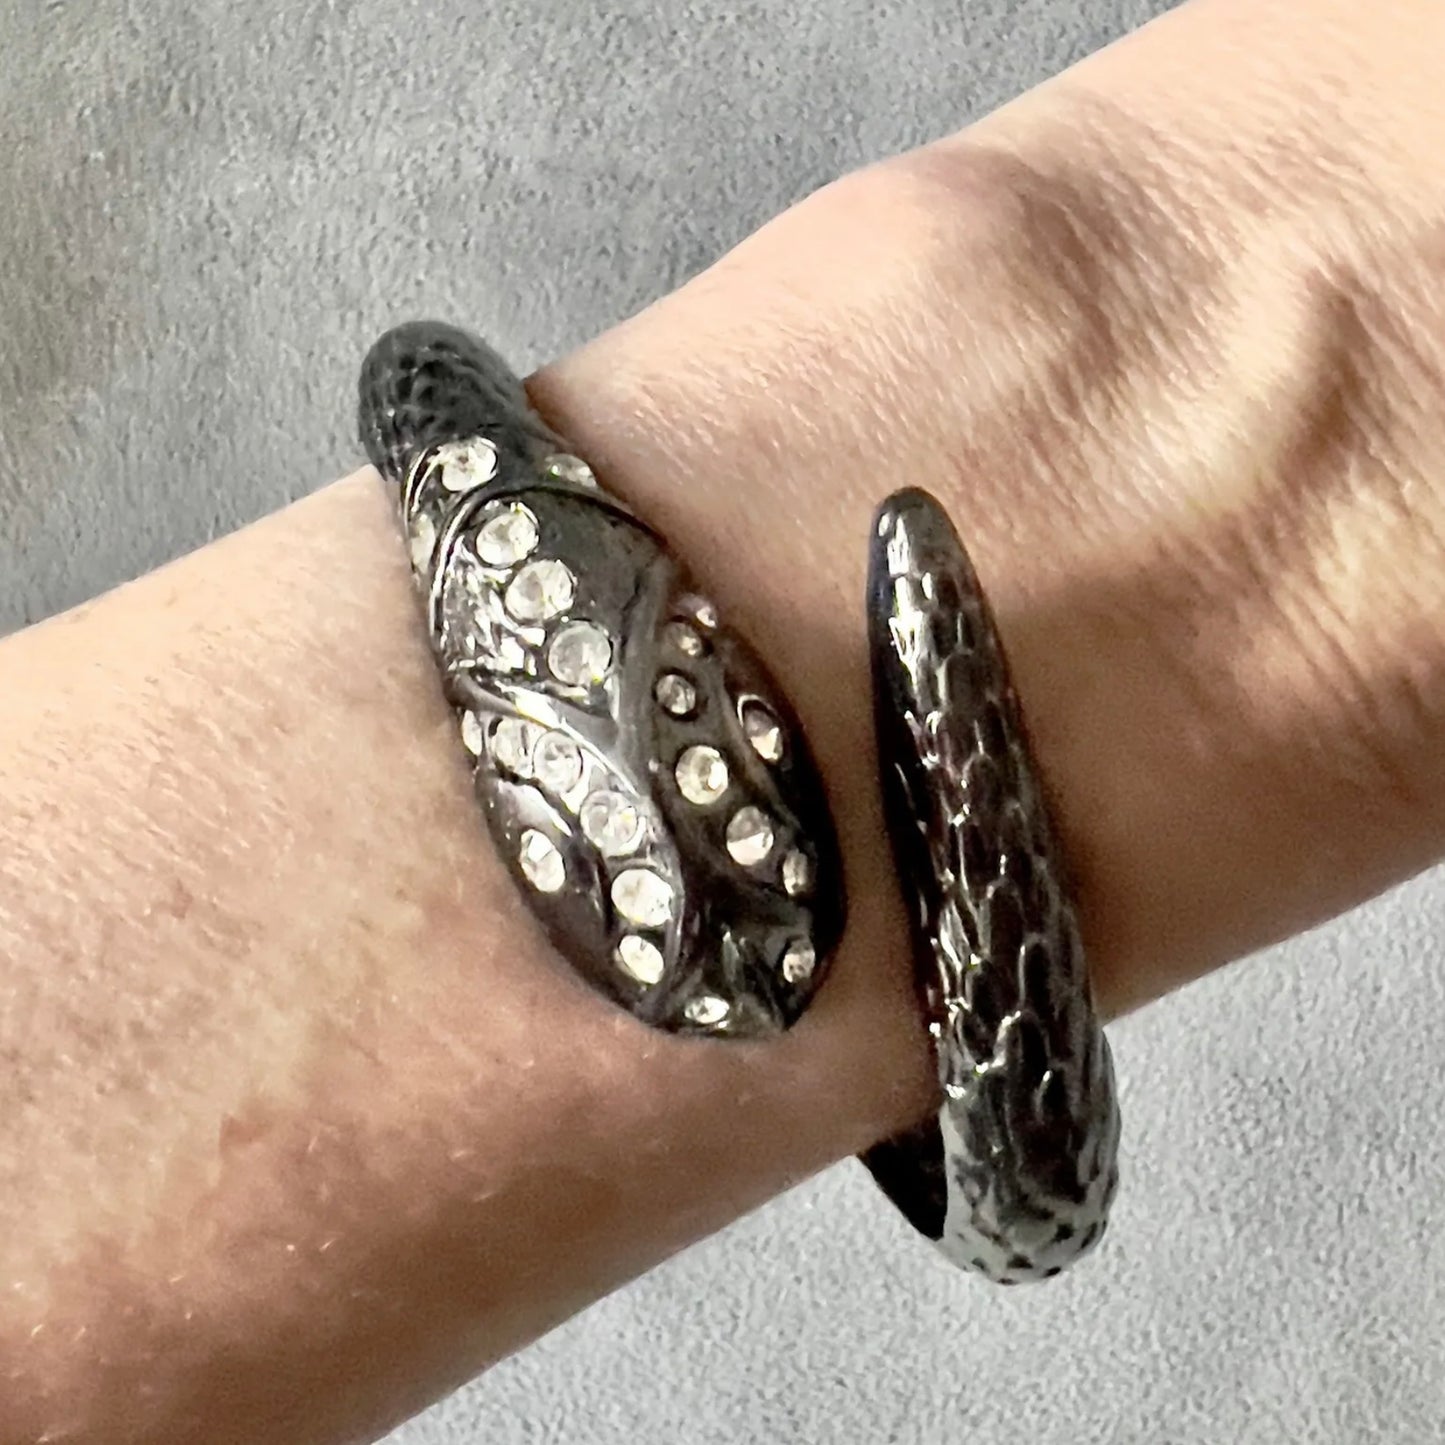 BUCKINGHAM Snake Bracelet with Crystals 6.75 Inches